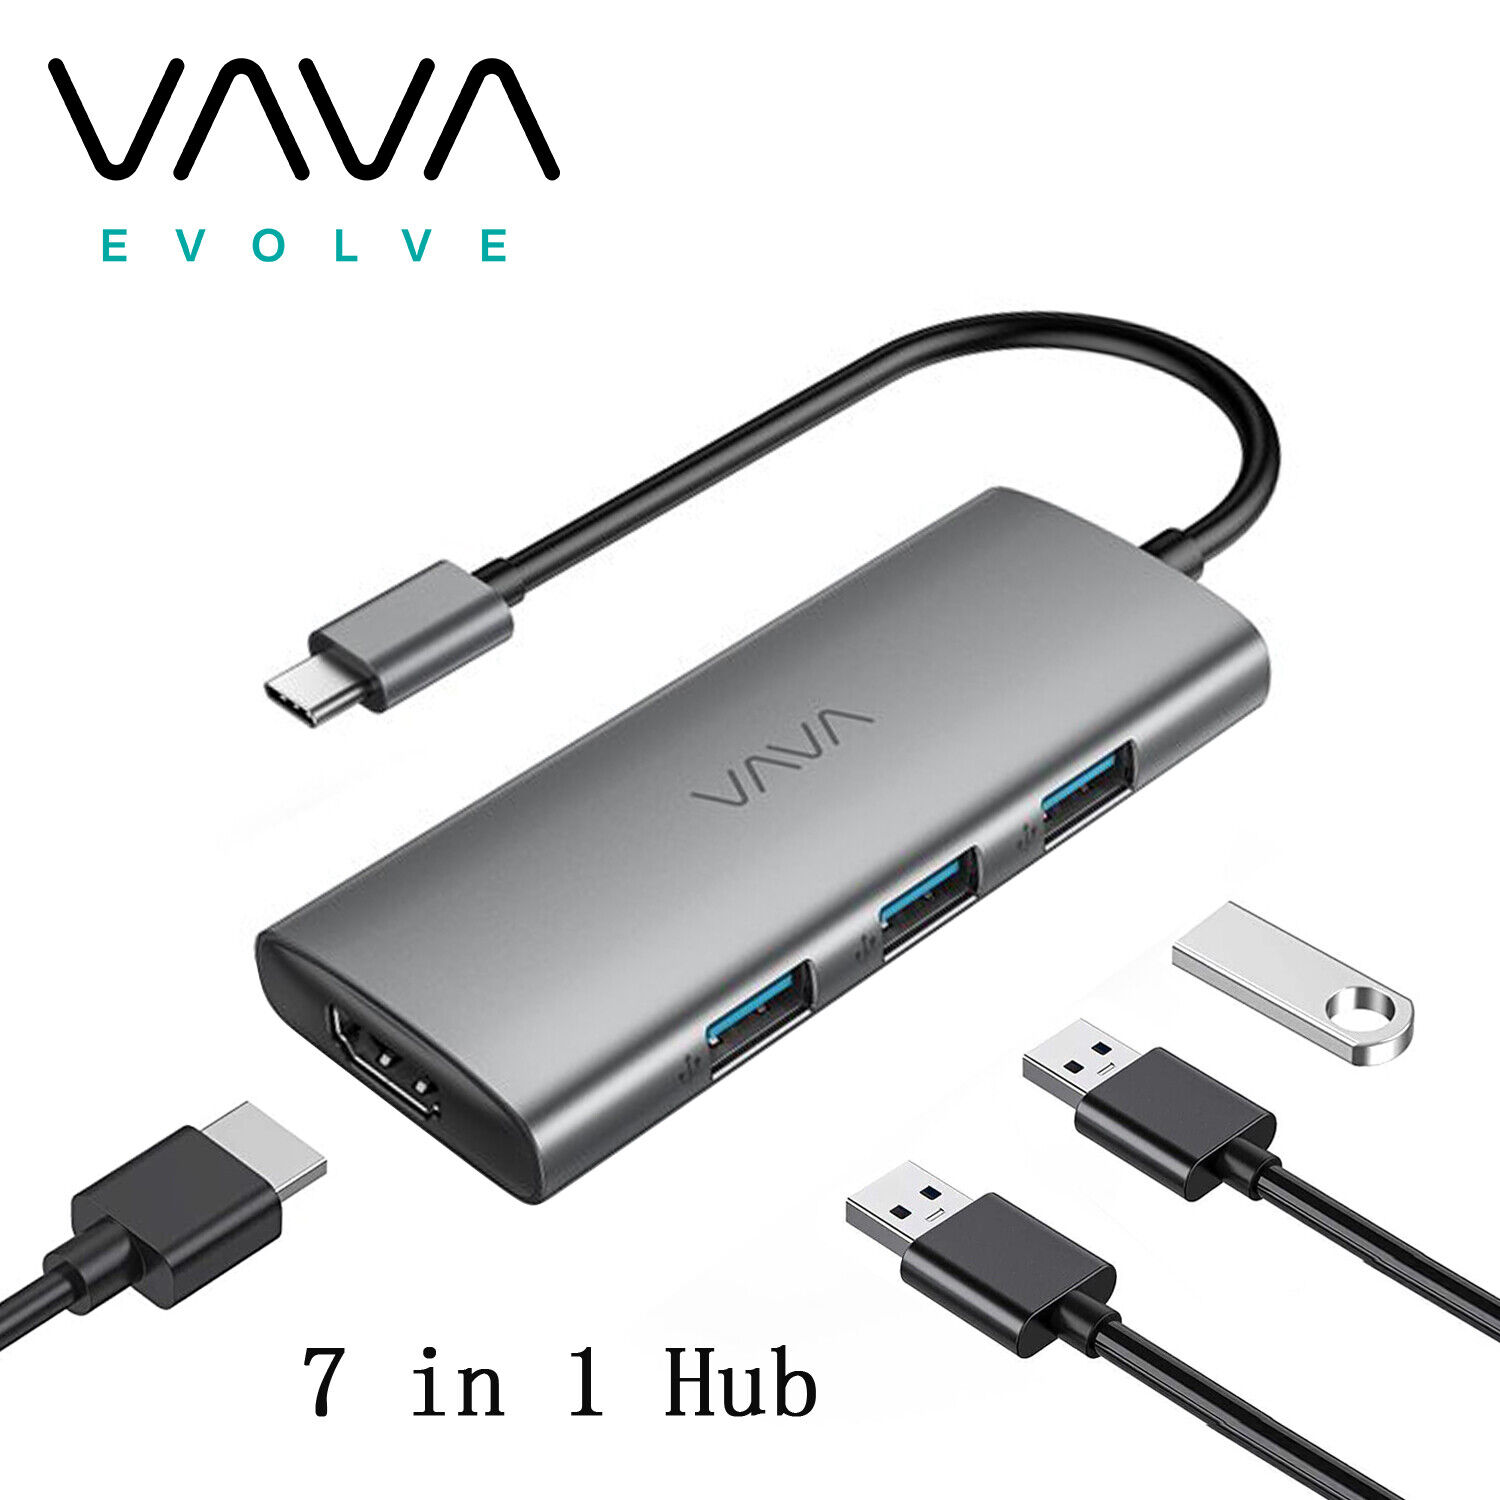 VAVA USB C Hub 7-in-1 USB C Adapter 100W Power Delivery Charging 7 Port